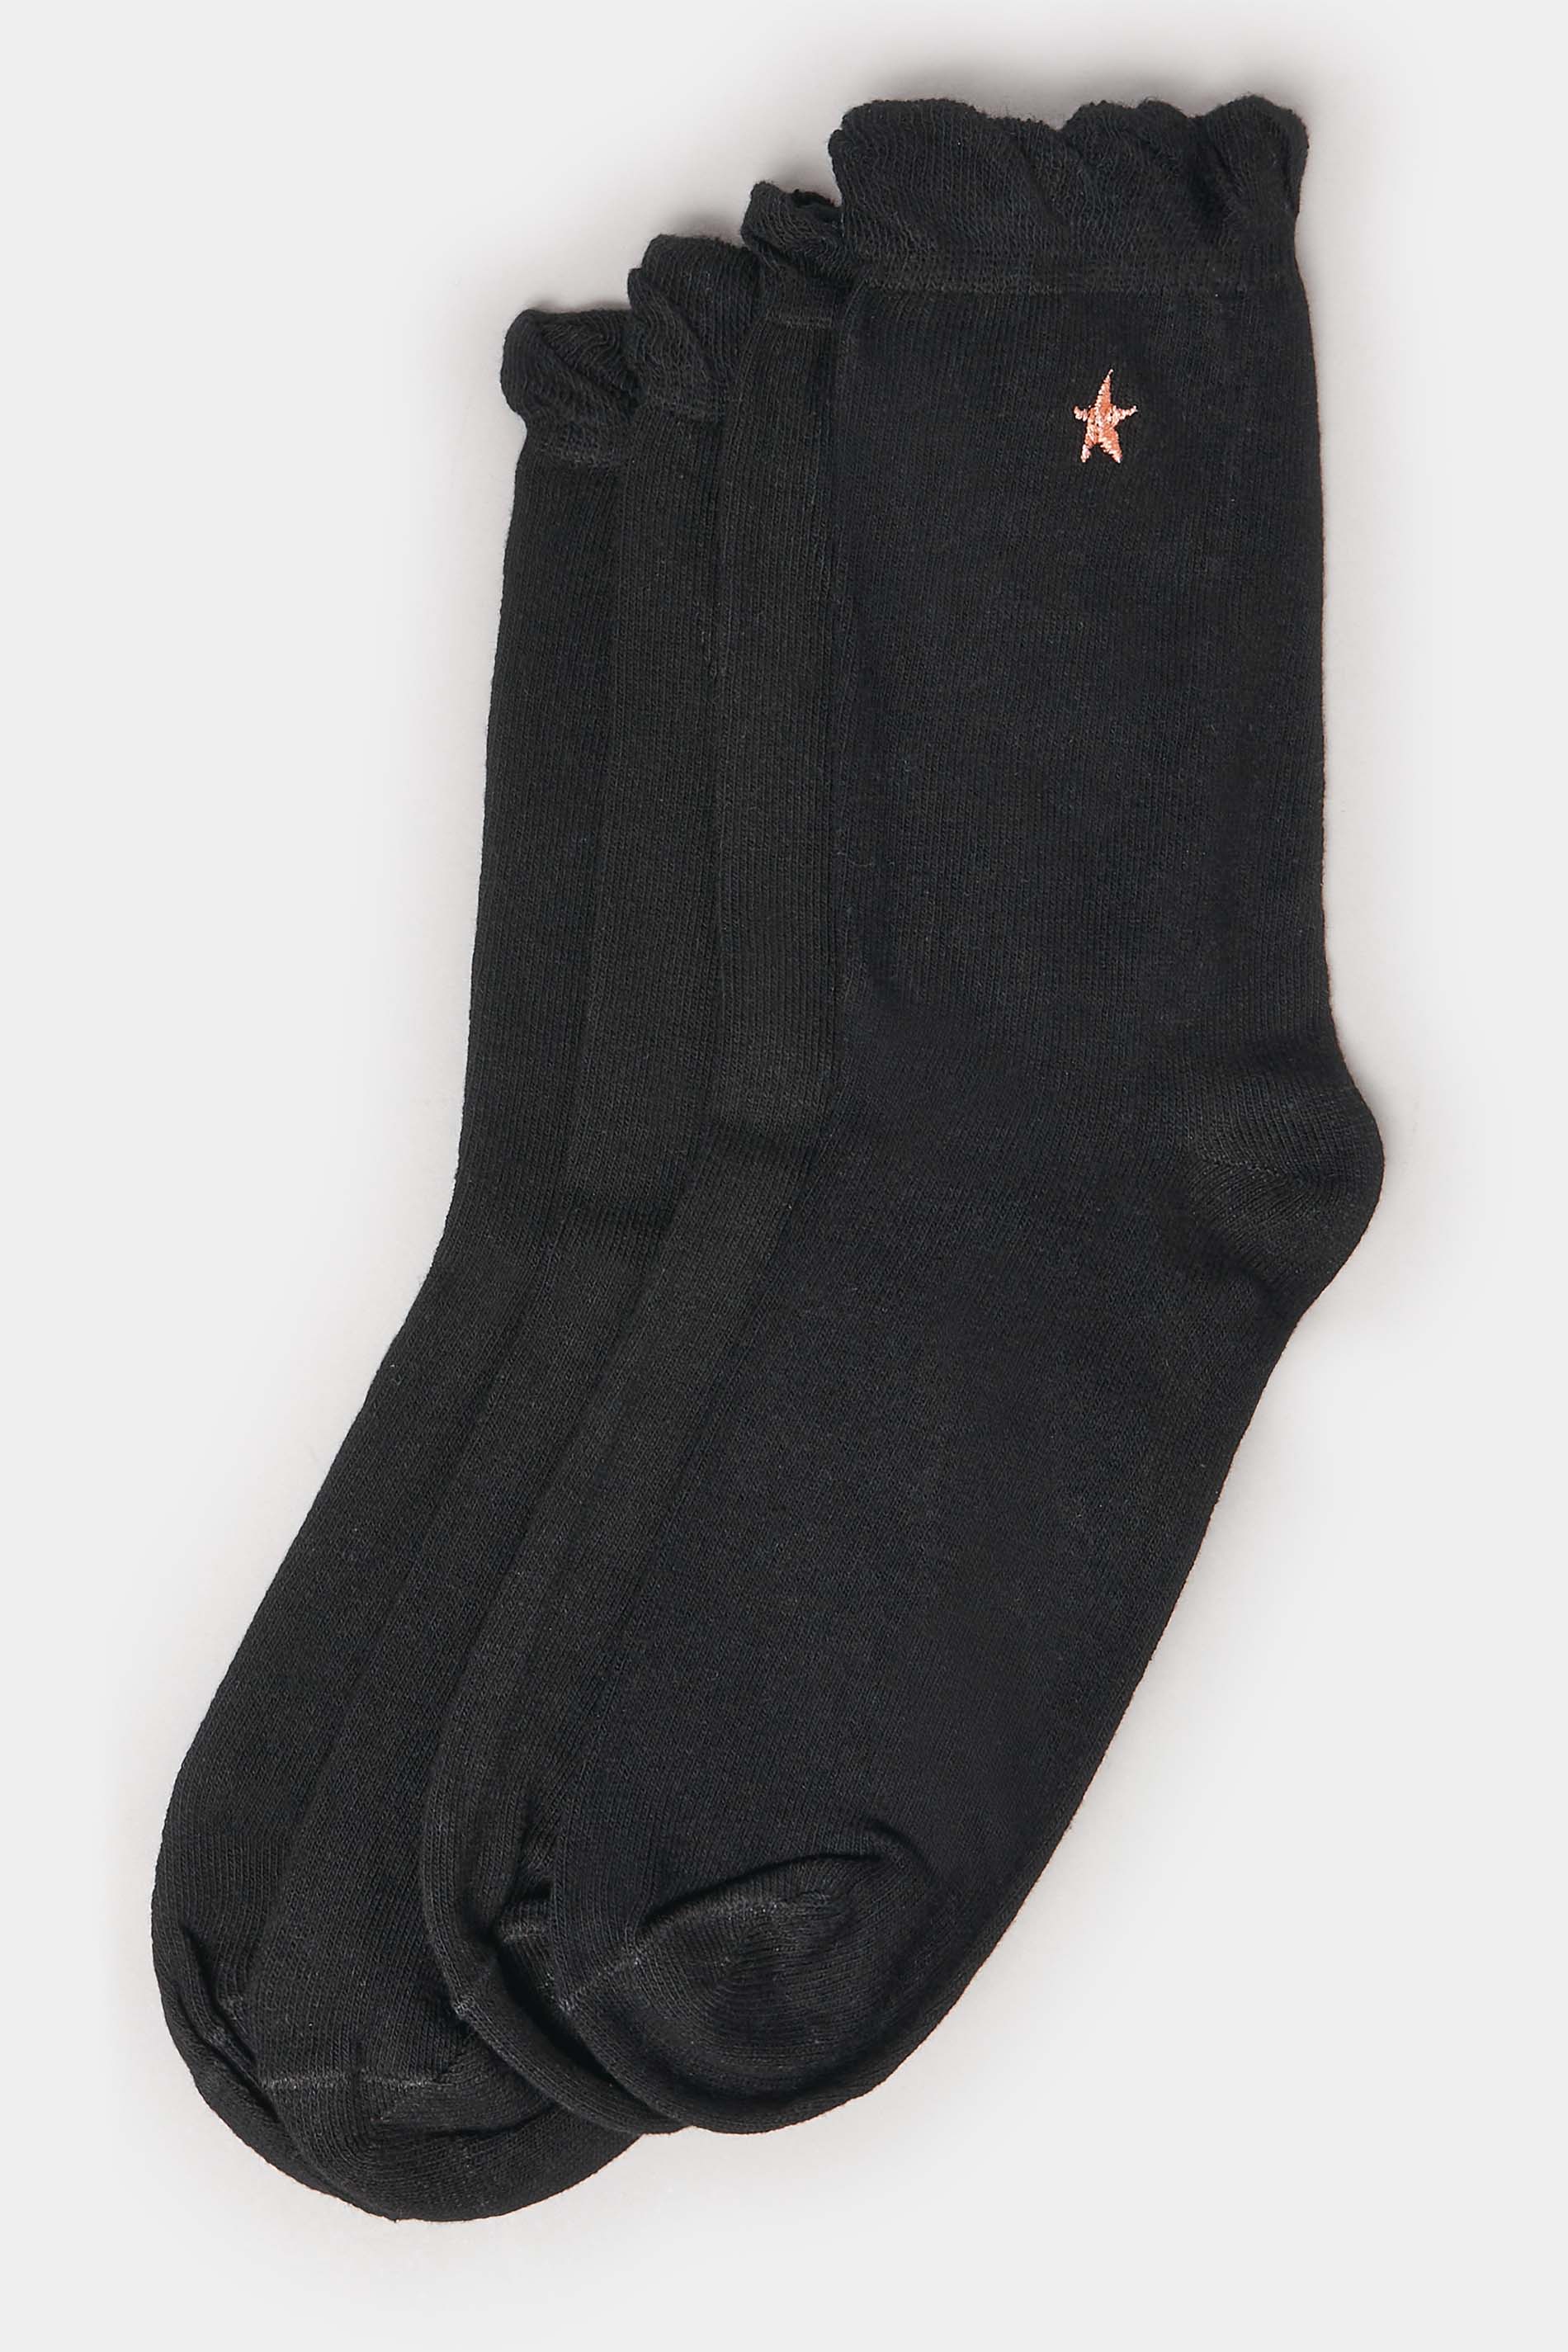 YOURS 4 PACK Black Embroidered Star Ankle Socks | Yours Clothing 3